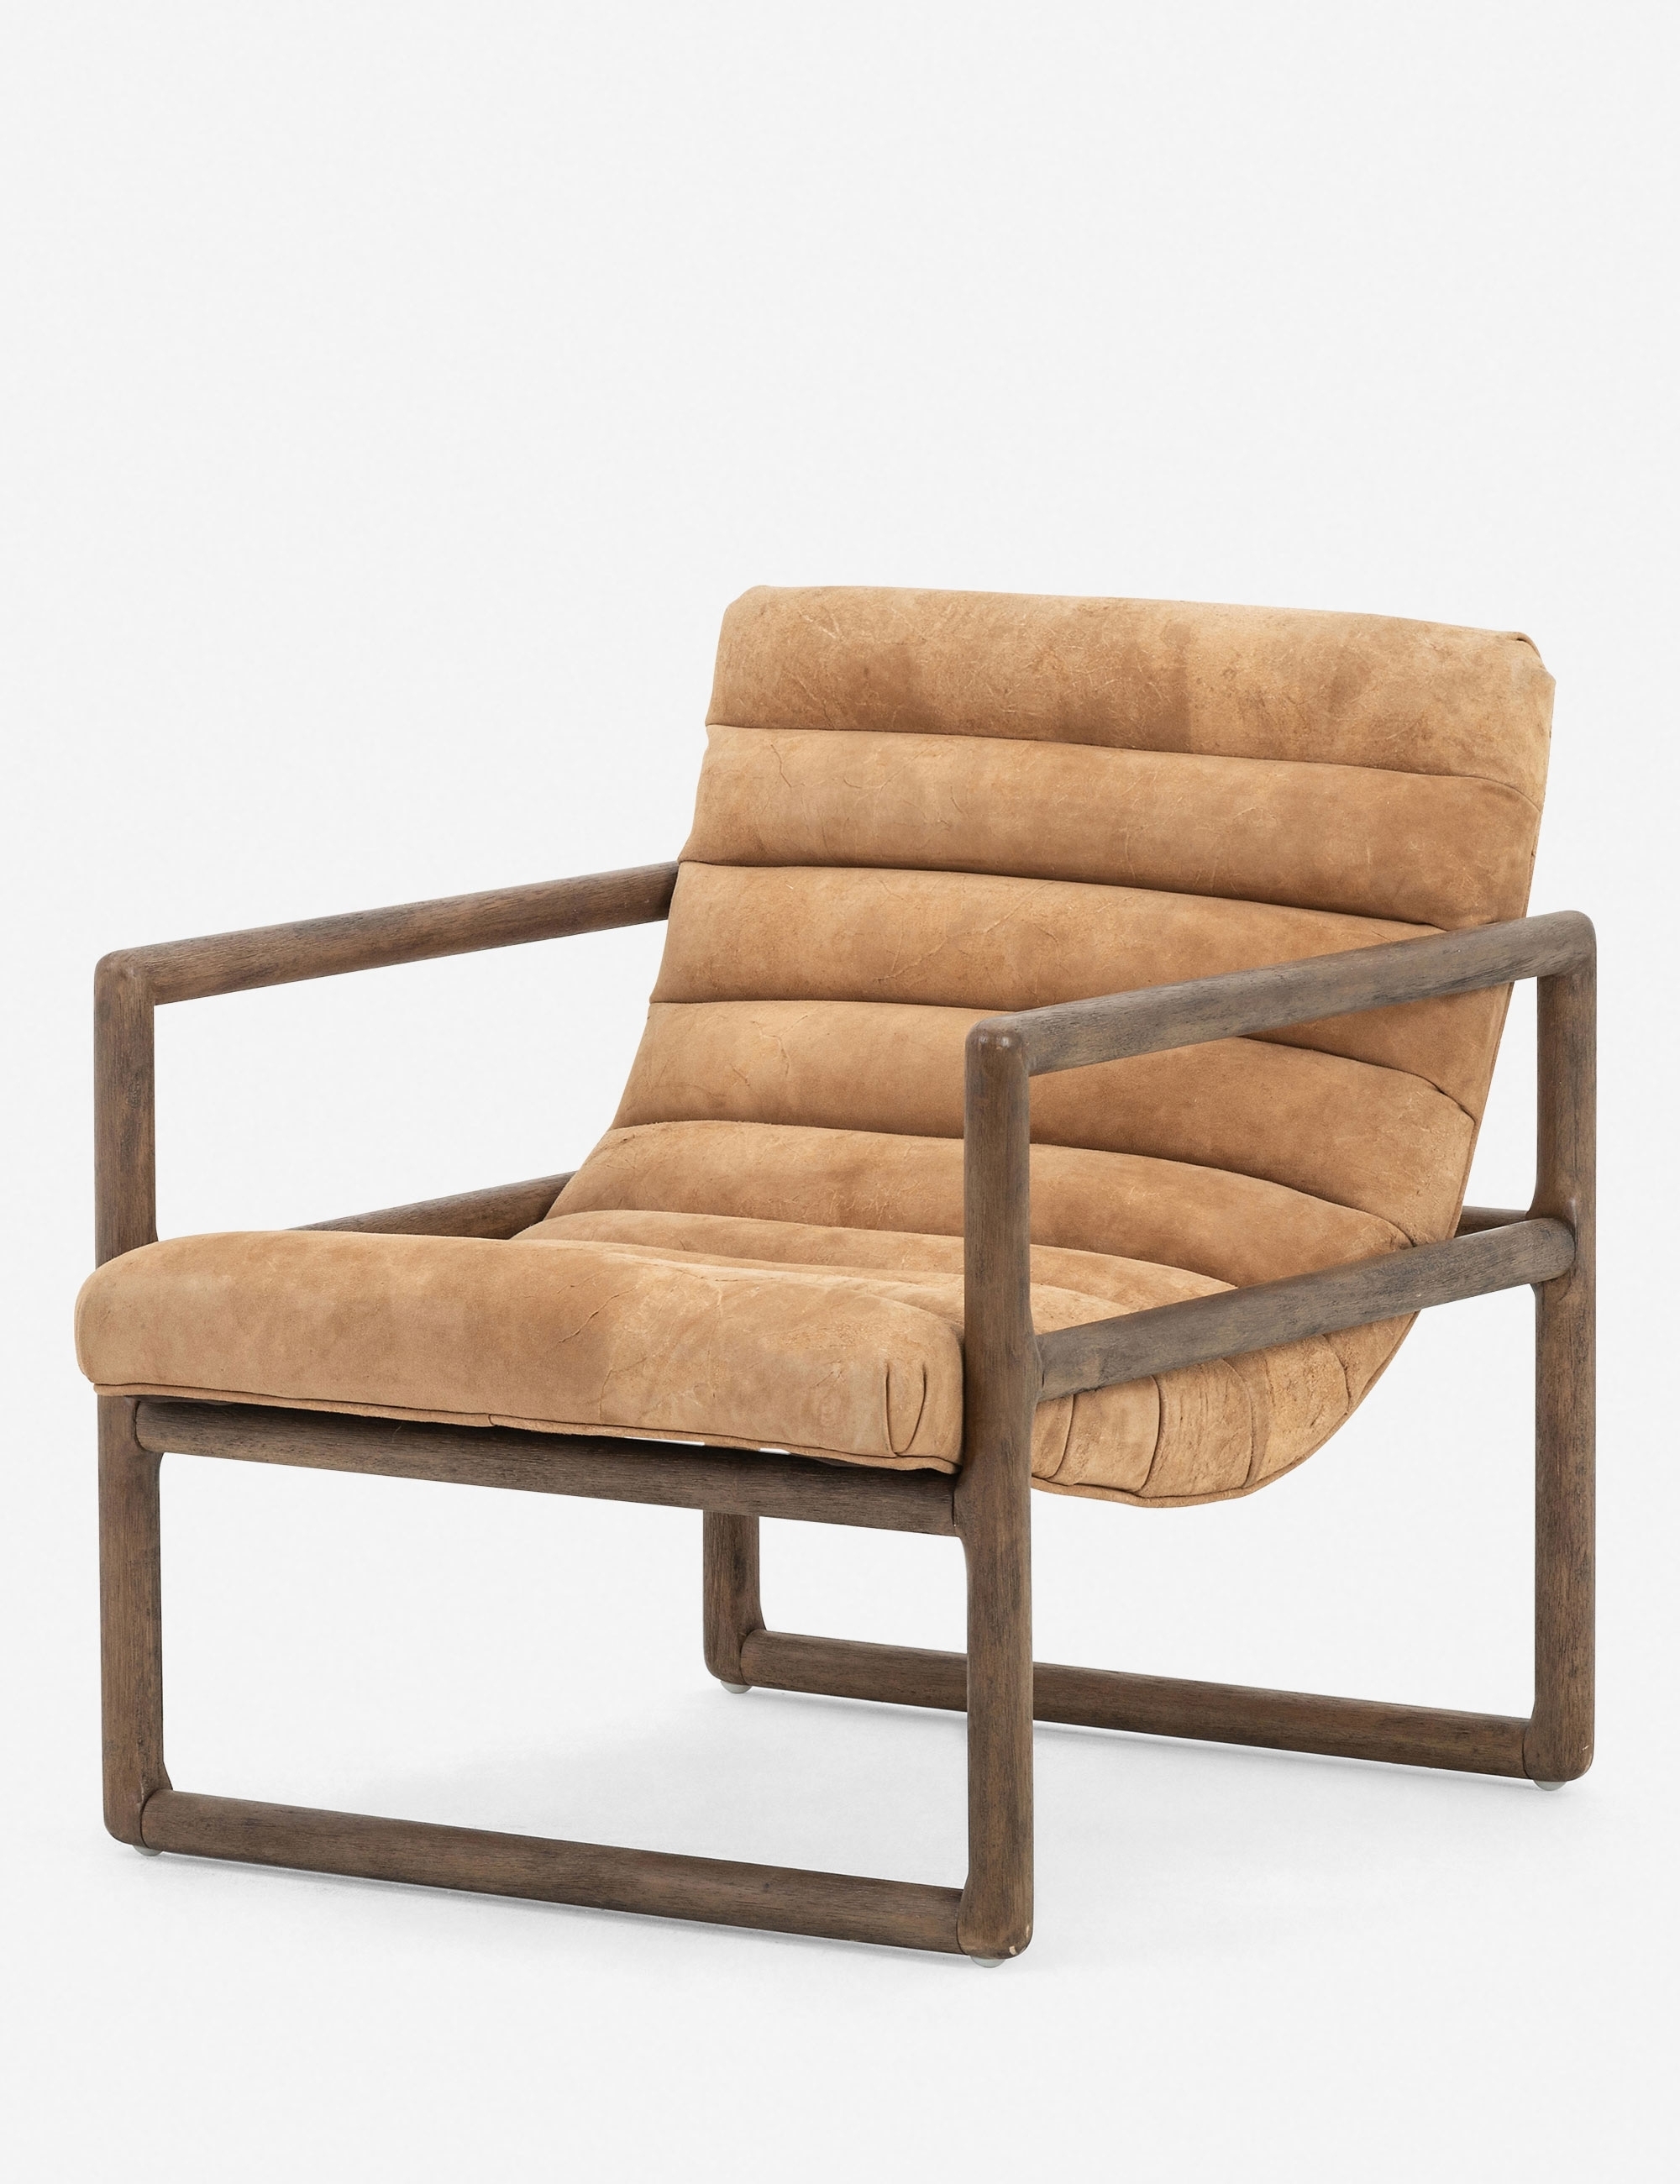 Huxley Accent Chair, Whistley Chamois - Image 2